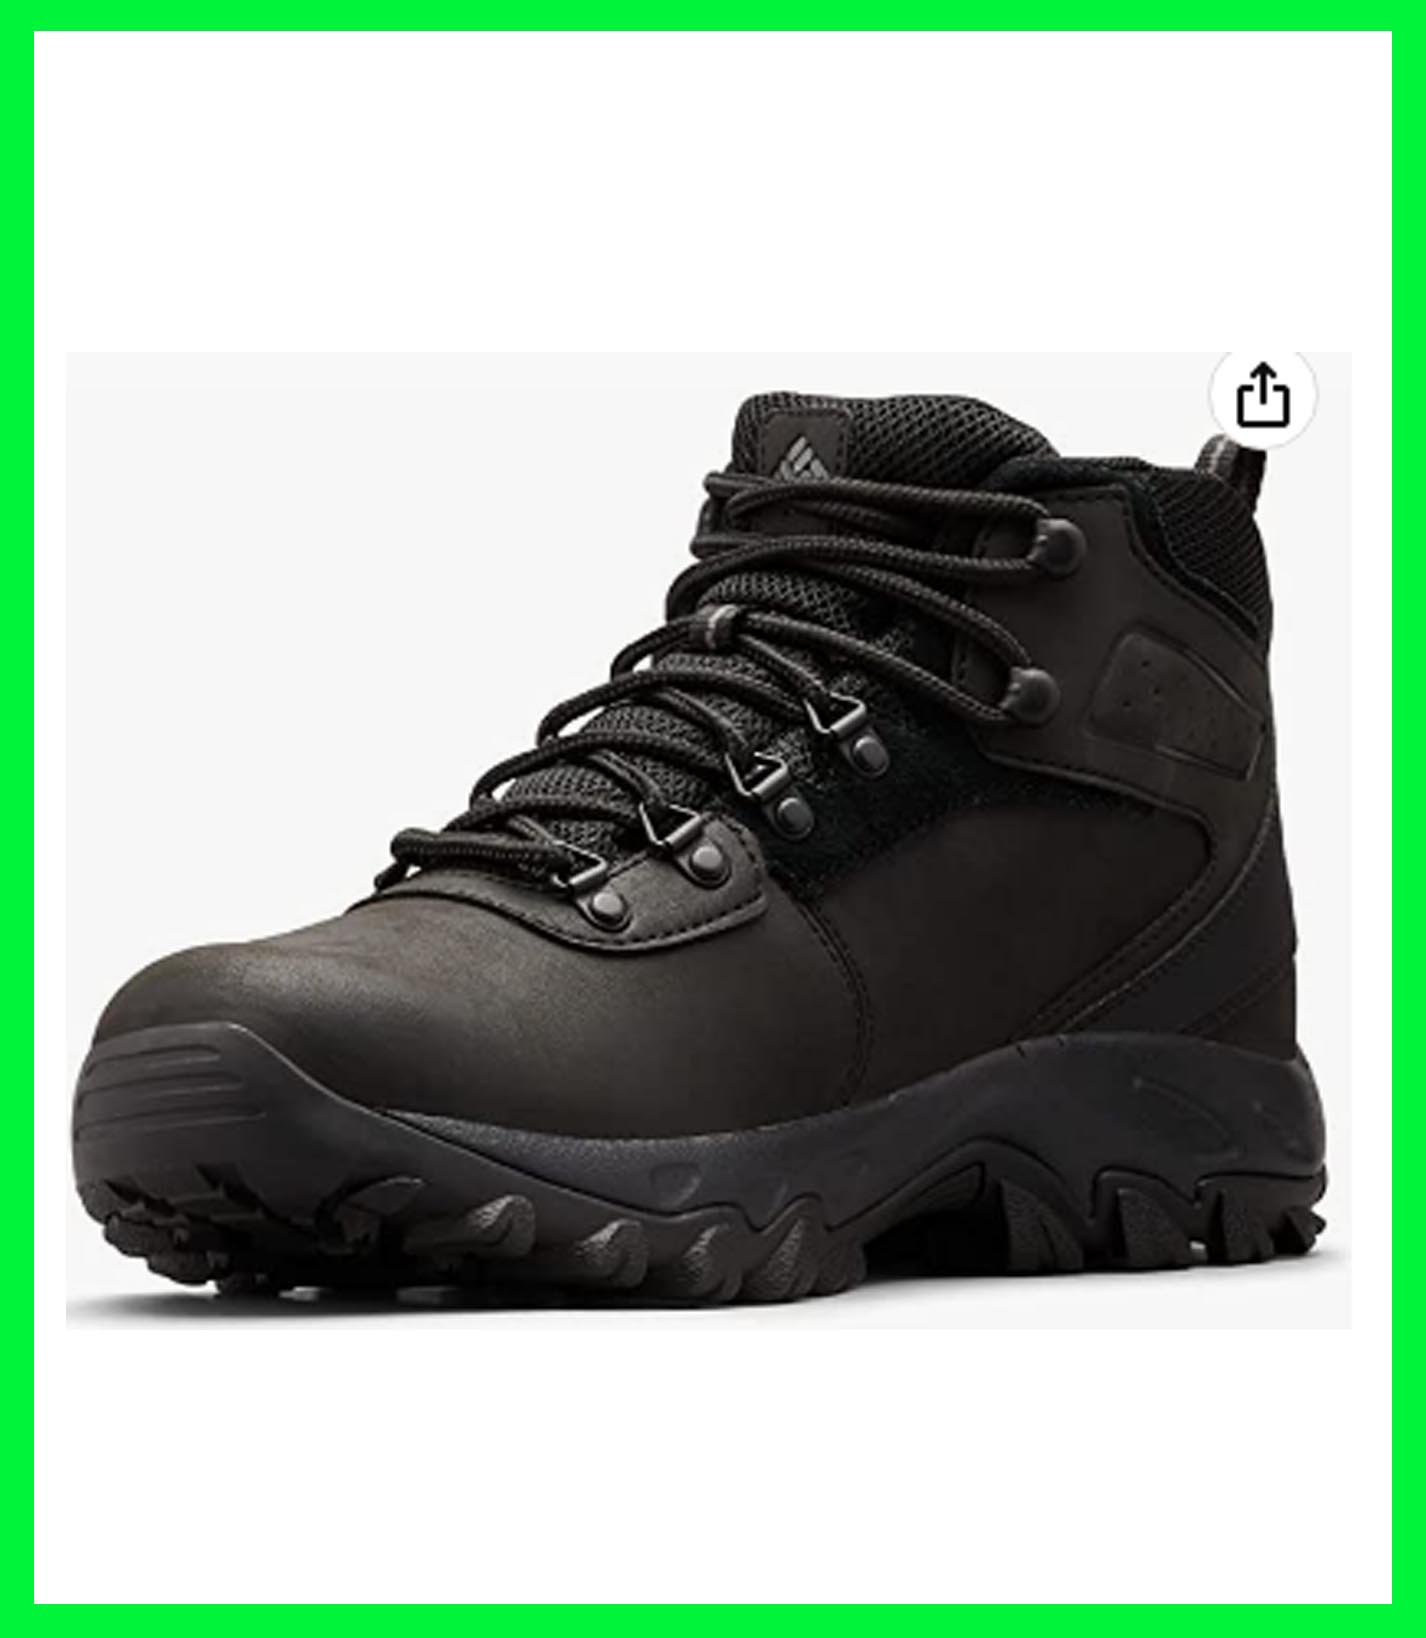 Best Work Boots for Plantar Fasciitis Reviews & Buying Guide in 2023